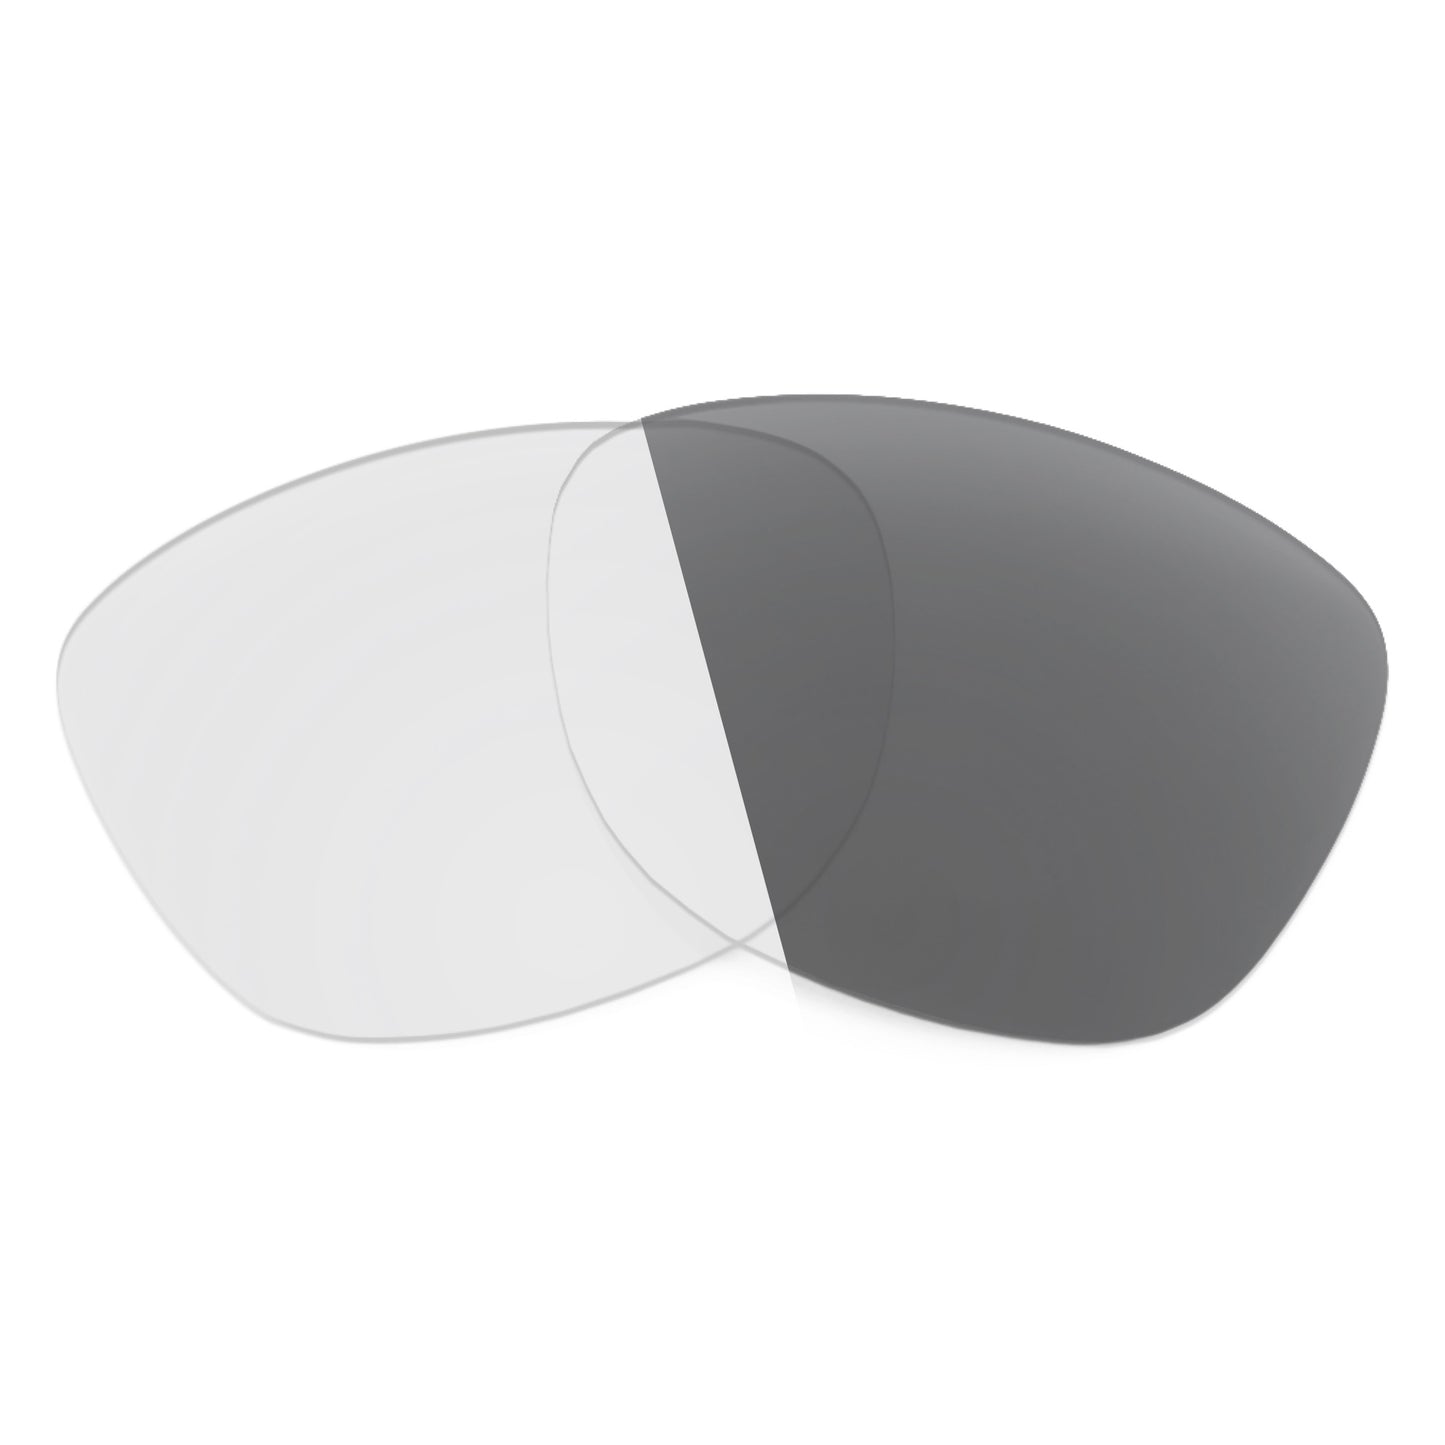 Revant replacement lenses for Ray-Ban Marshal RB3648 51mm Non-Polarized Adapt Gray Photochromic